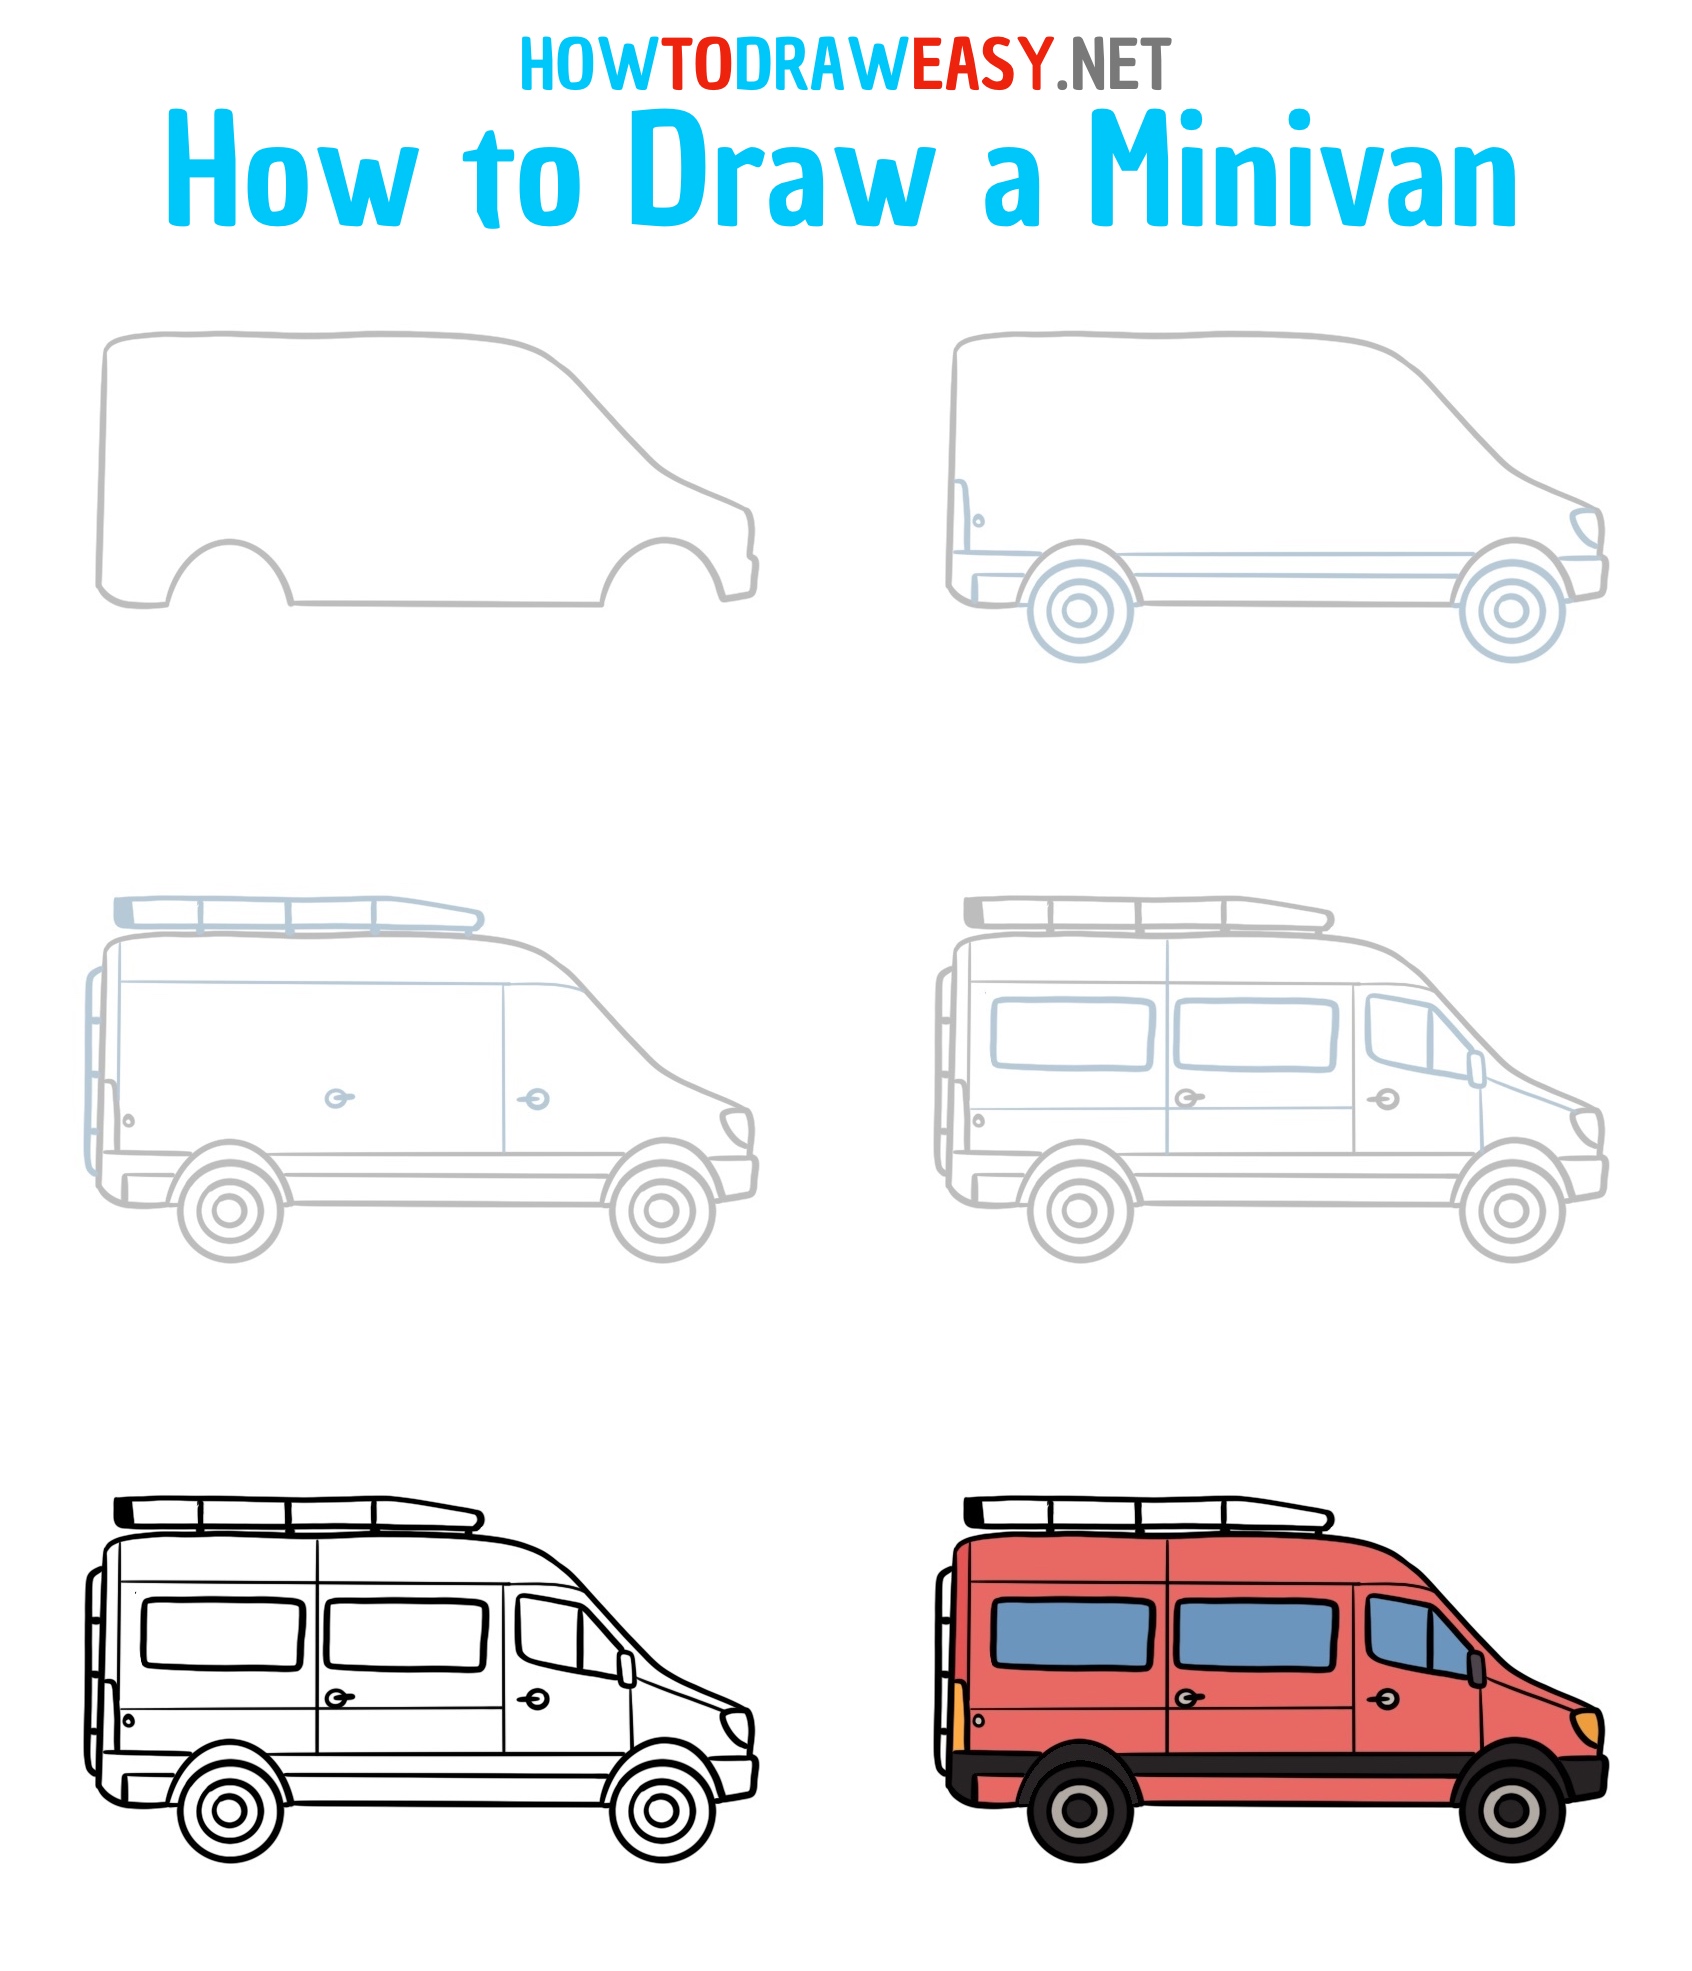 How to Draw a Minivan Step by Step